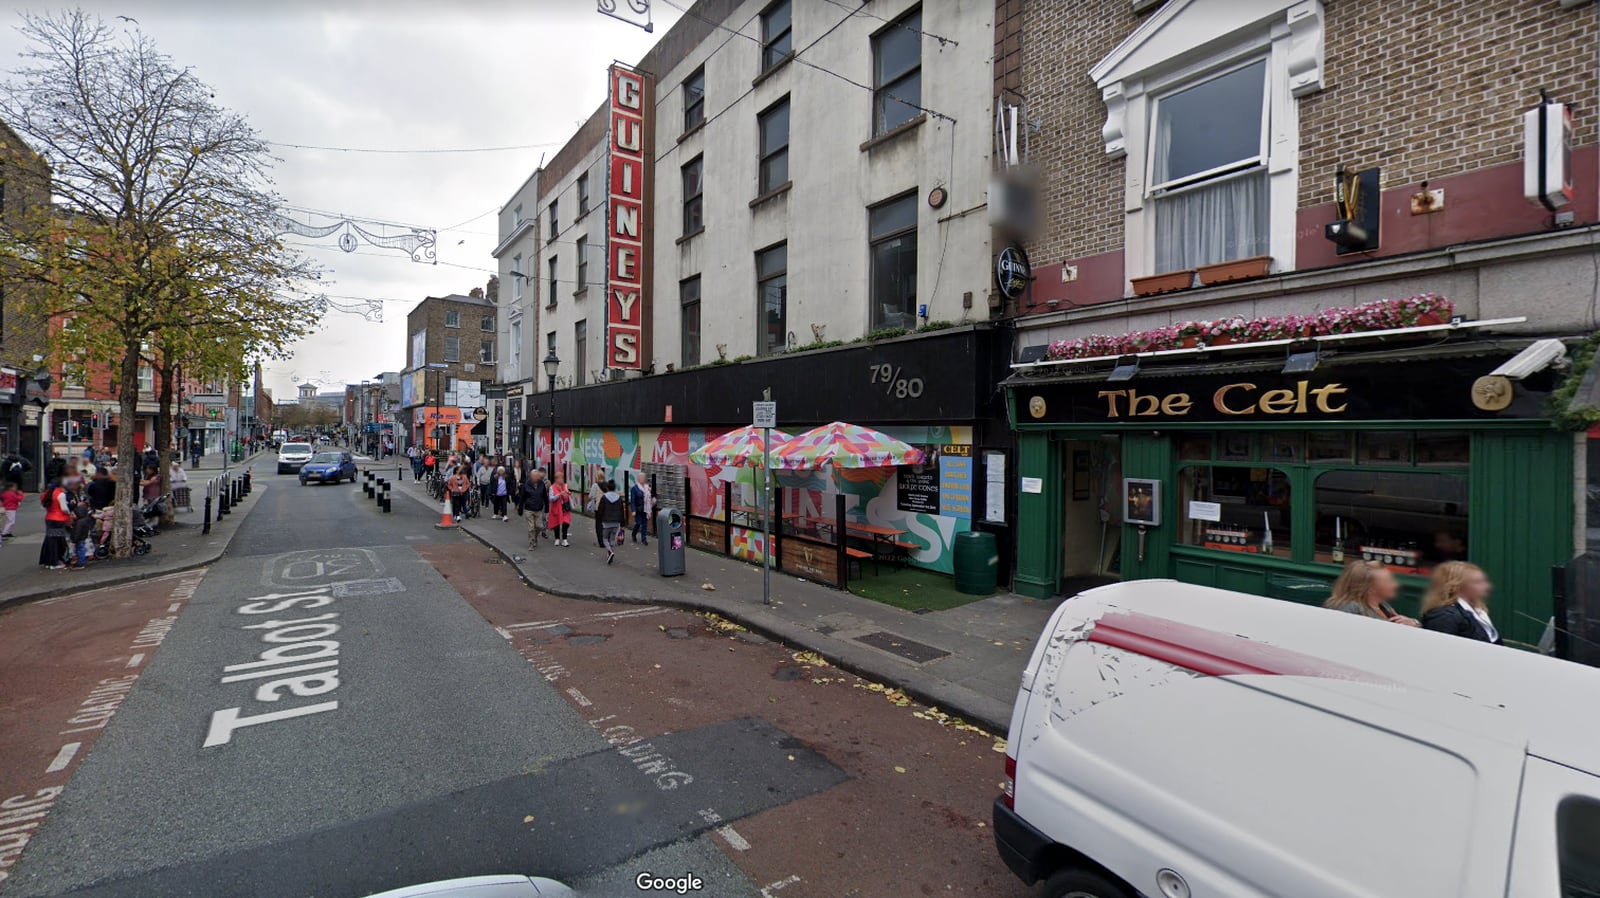 The Celt Lodge on Dublin's Talbot street where the US tourist had been staying. Photograph: Google Street